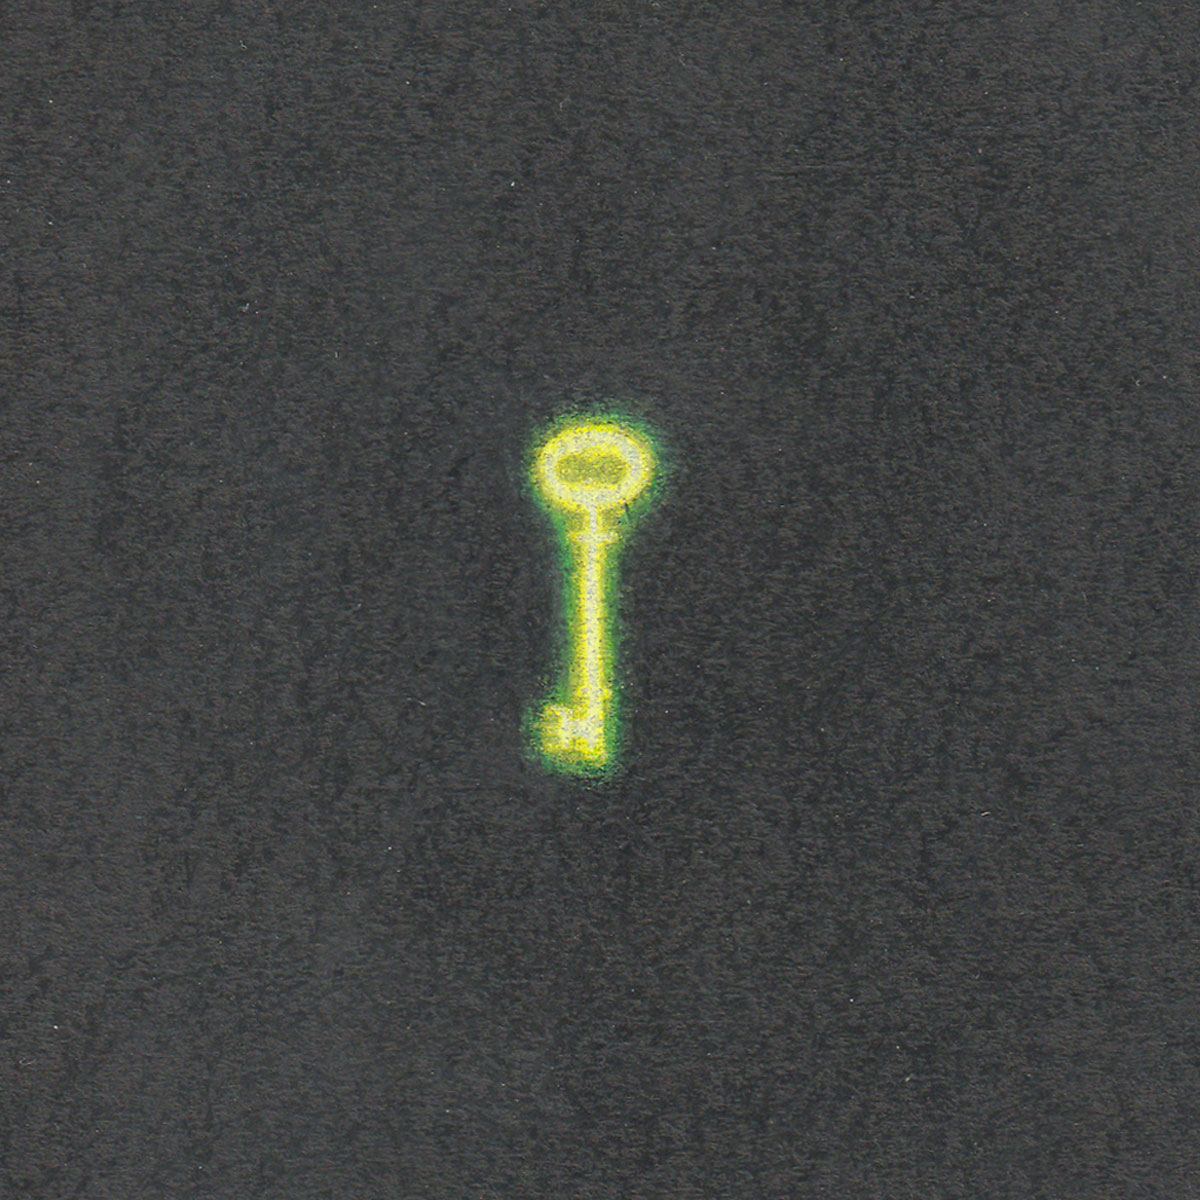 Glowing yellow key against a black background